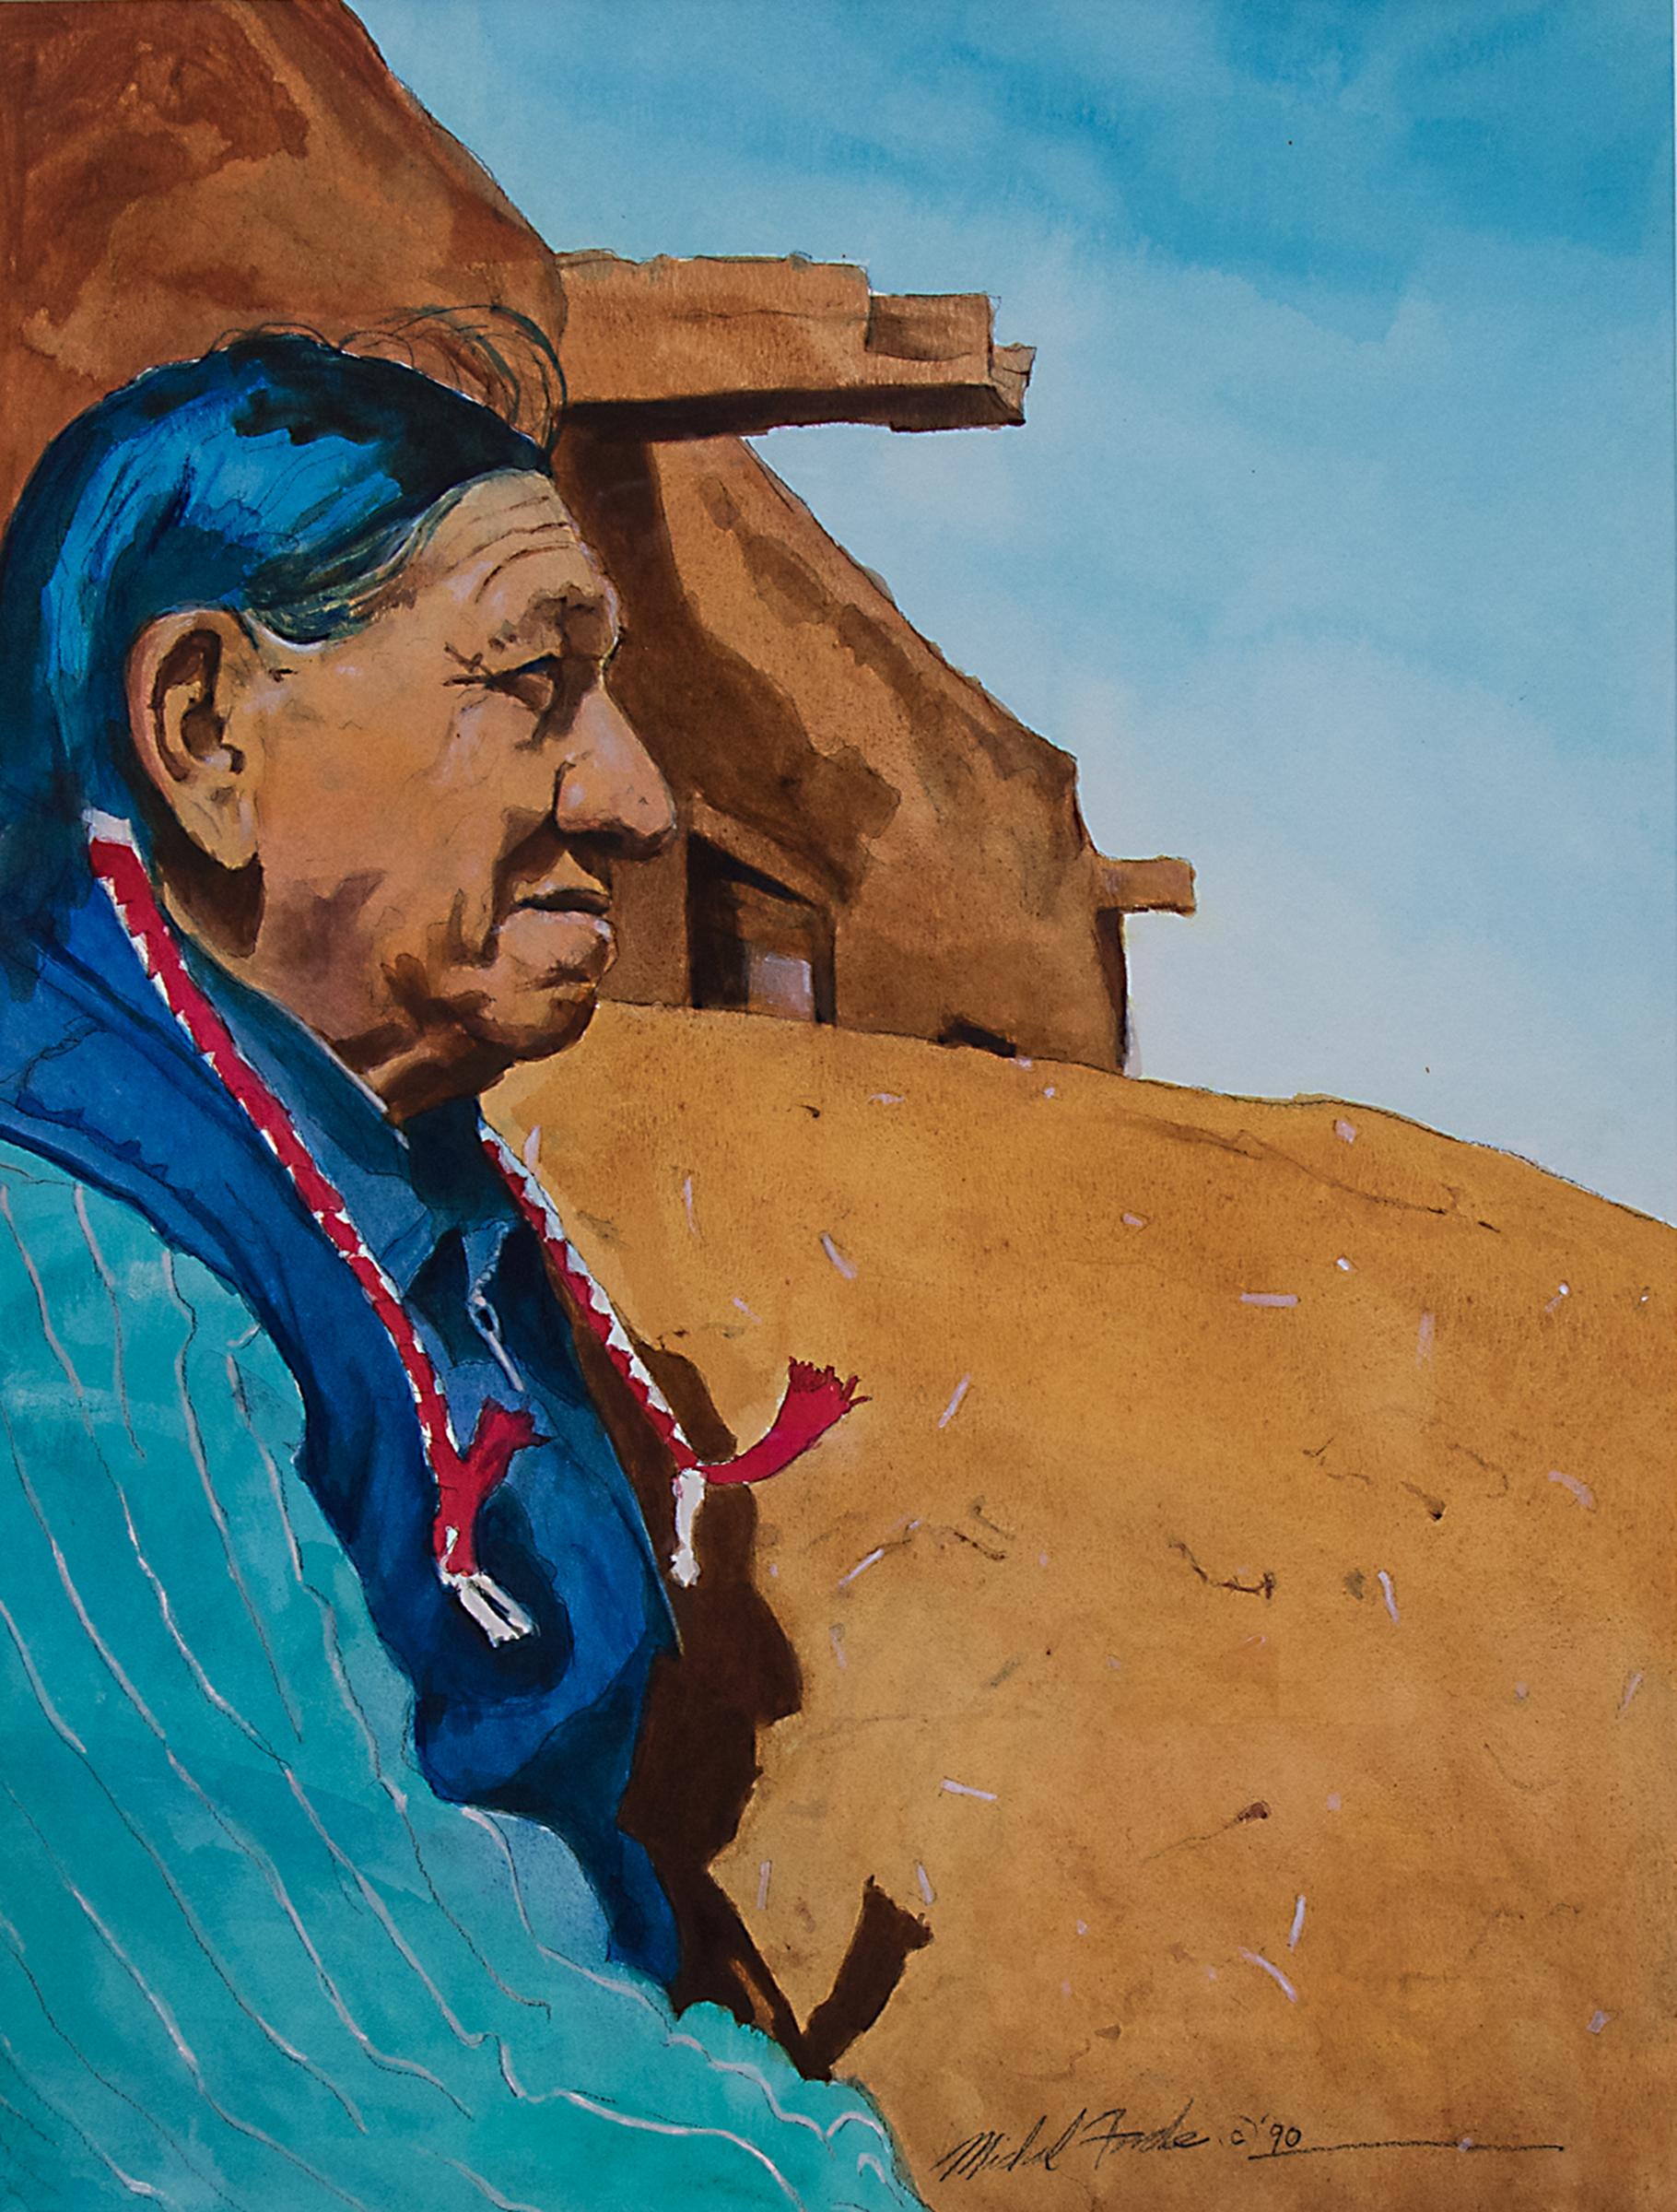 Original watercolor painting of a Native American man and Pueblo at Taos, New Mexico by Michael Forde. Watercolor on paper, signed and dated lower right. Presented in a custom frame with all archival materials, outer dimensions measure 26 ¾ x 21 ¾